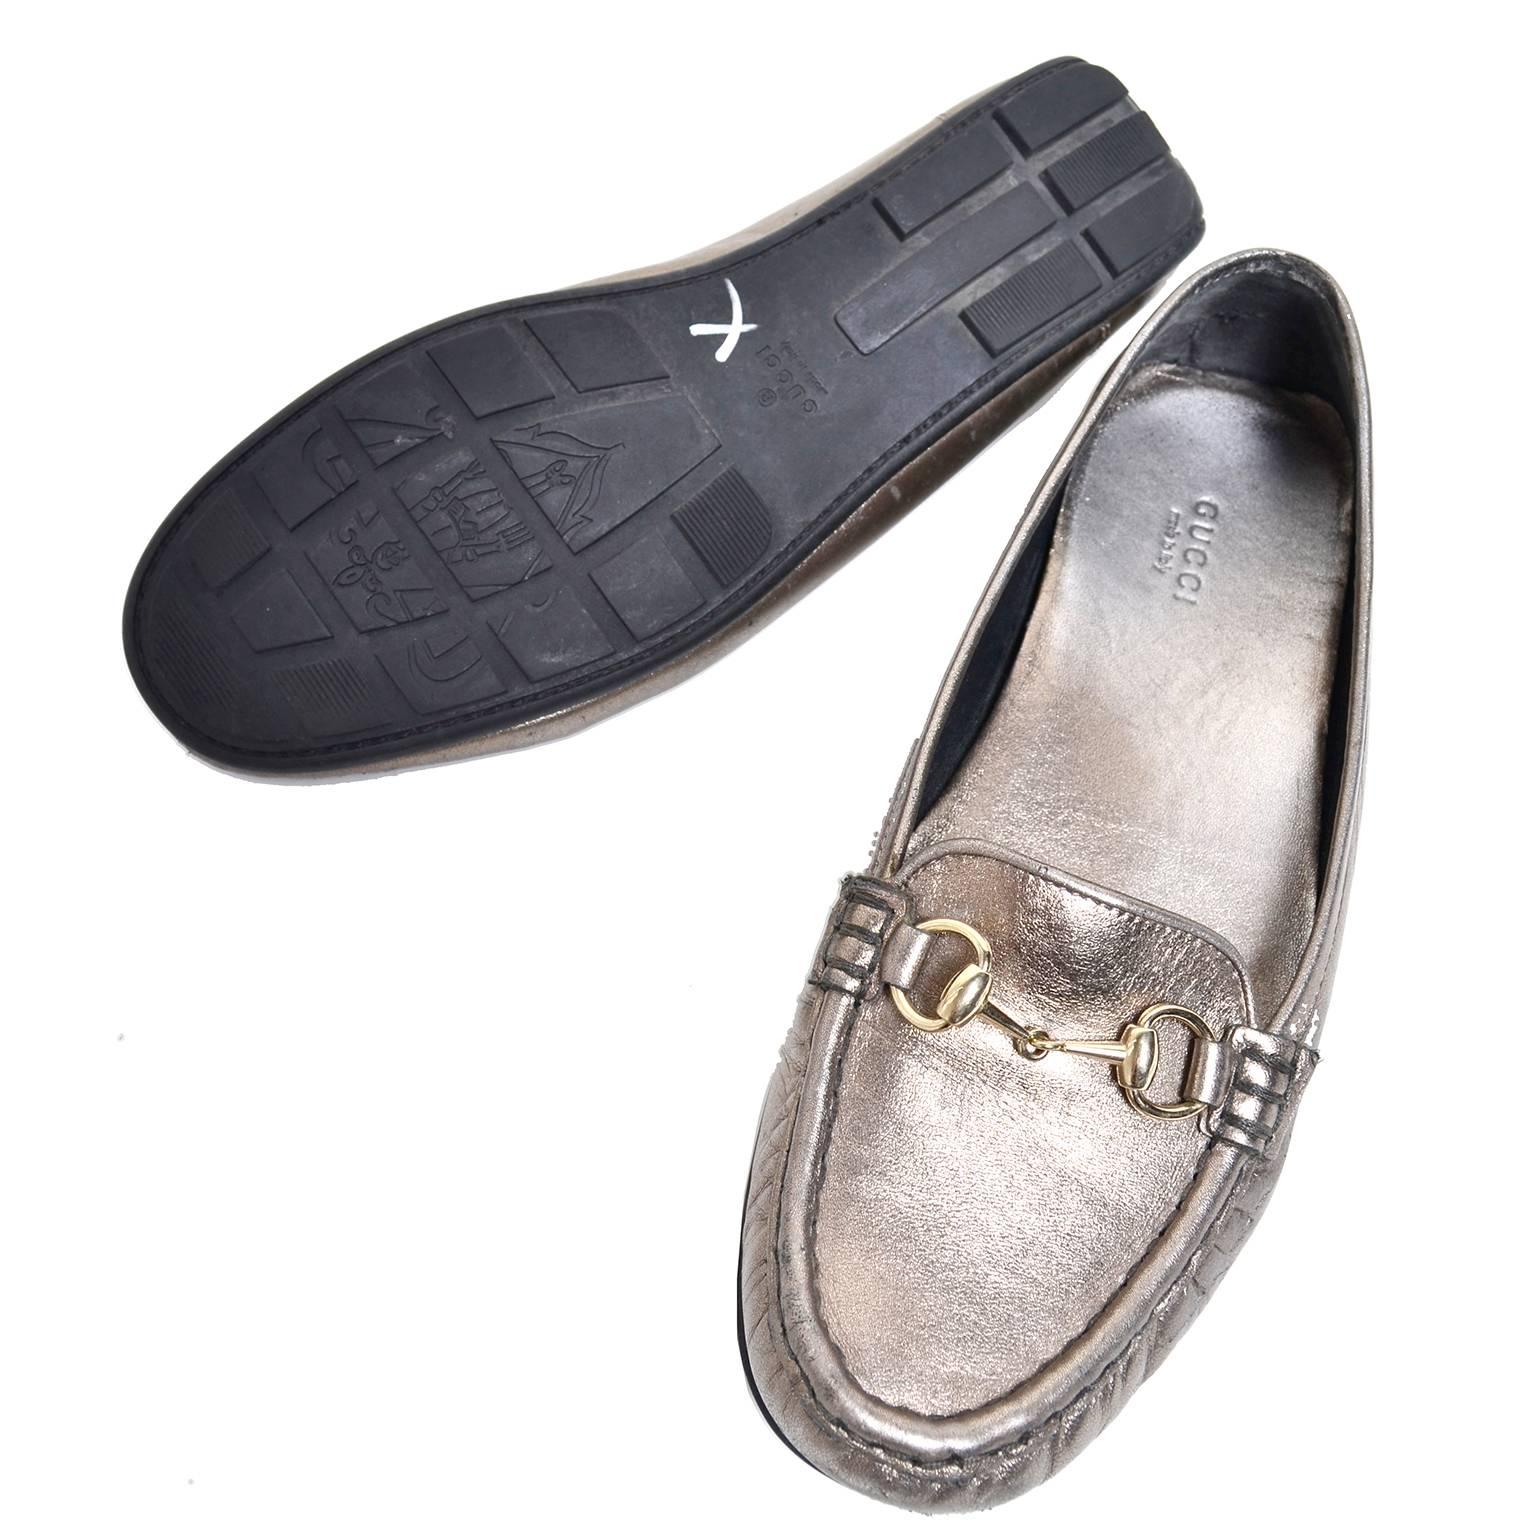 Gray Gucci Womens Metallic Loafer Driver Shoes with Horse Bit Buckles Size 37.5